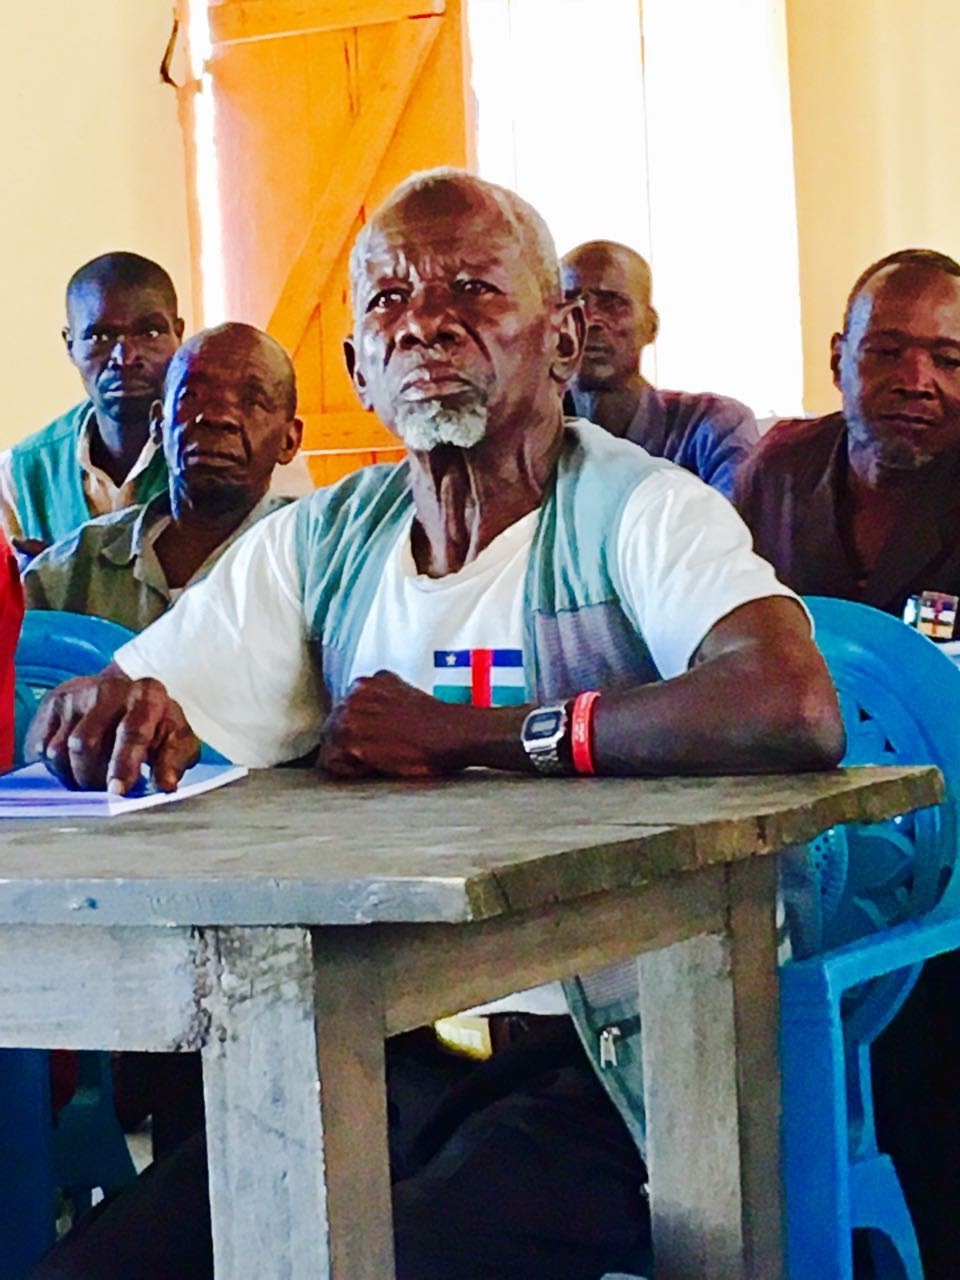 Idrissa, the village chief: “Thanks to the restitution (town hall), I understand that each position (prefect, deputy, sultan/mayor and village chief) is on equal footing and must respect each other mutually.”